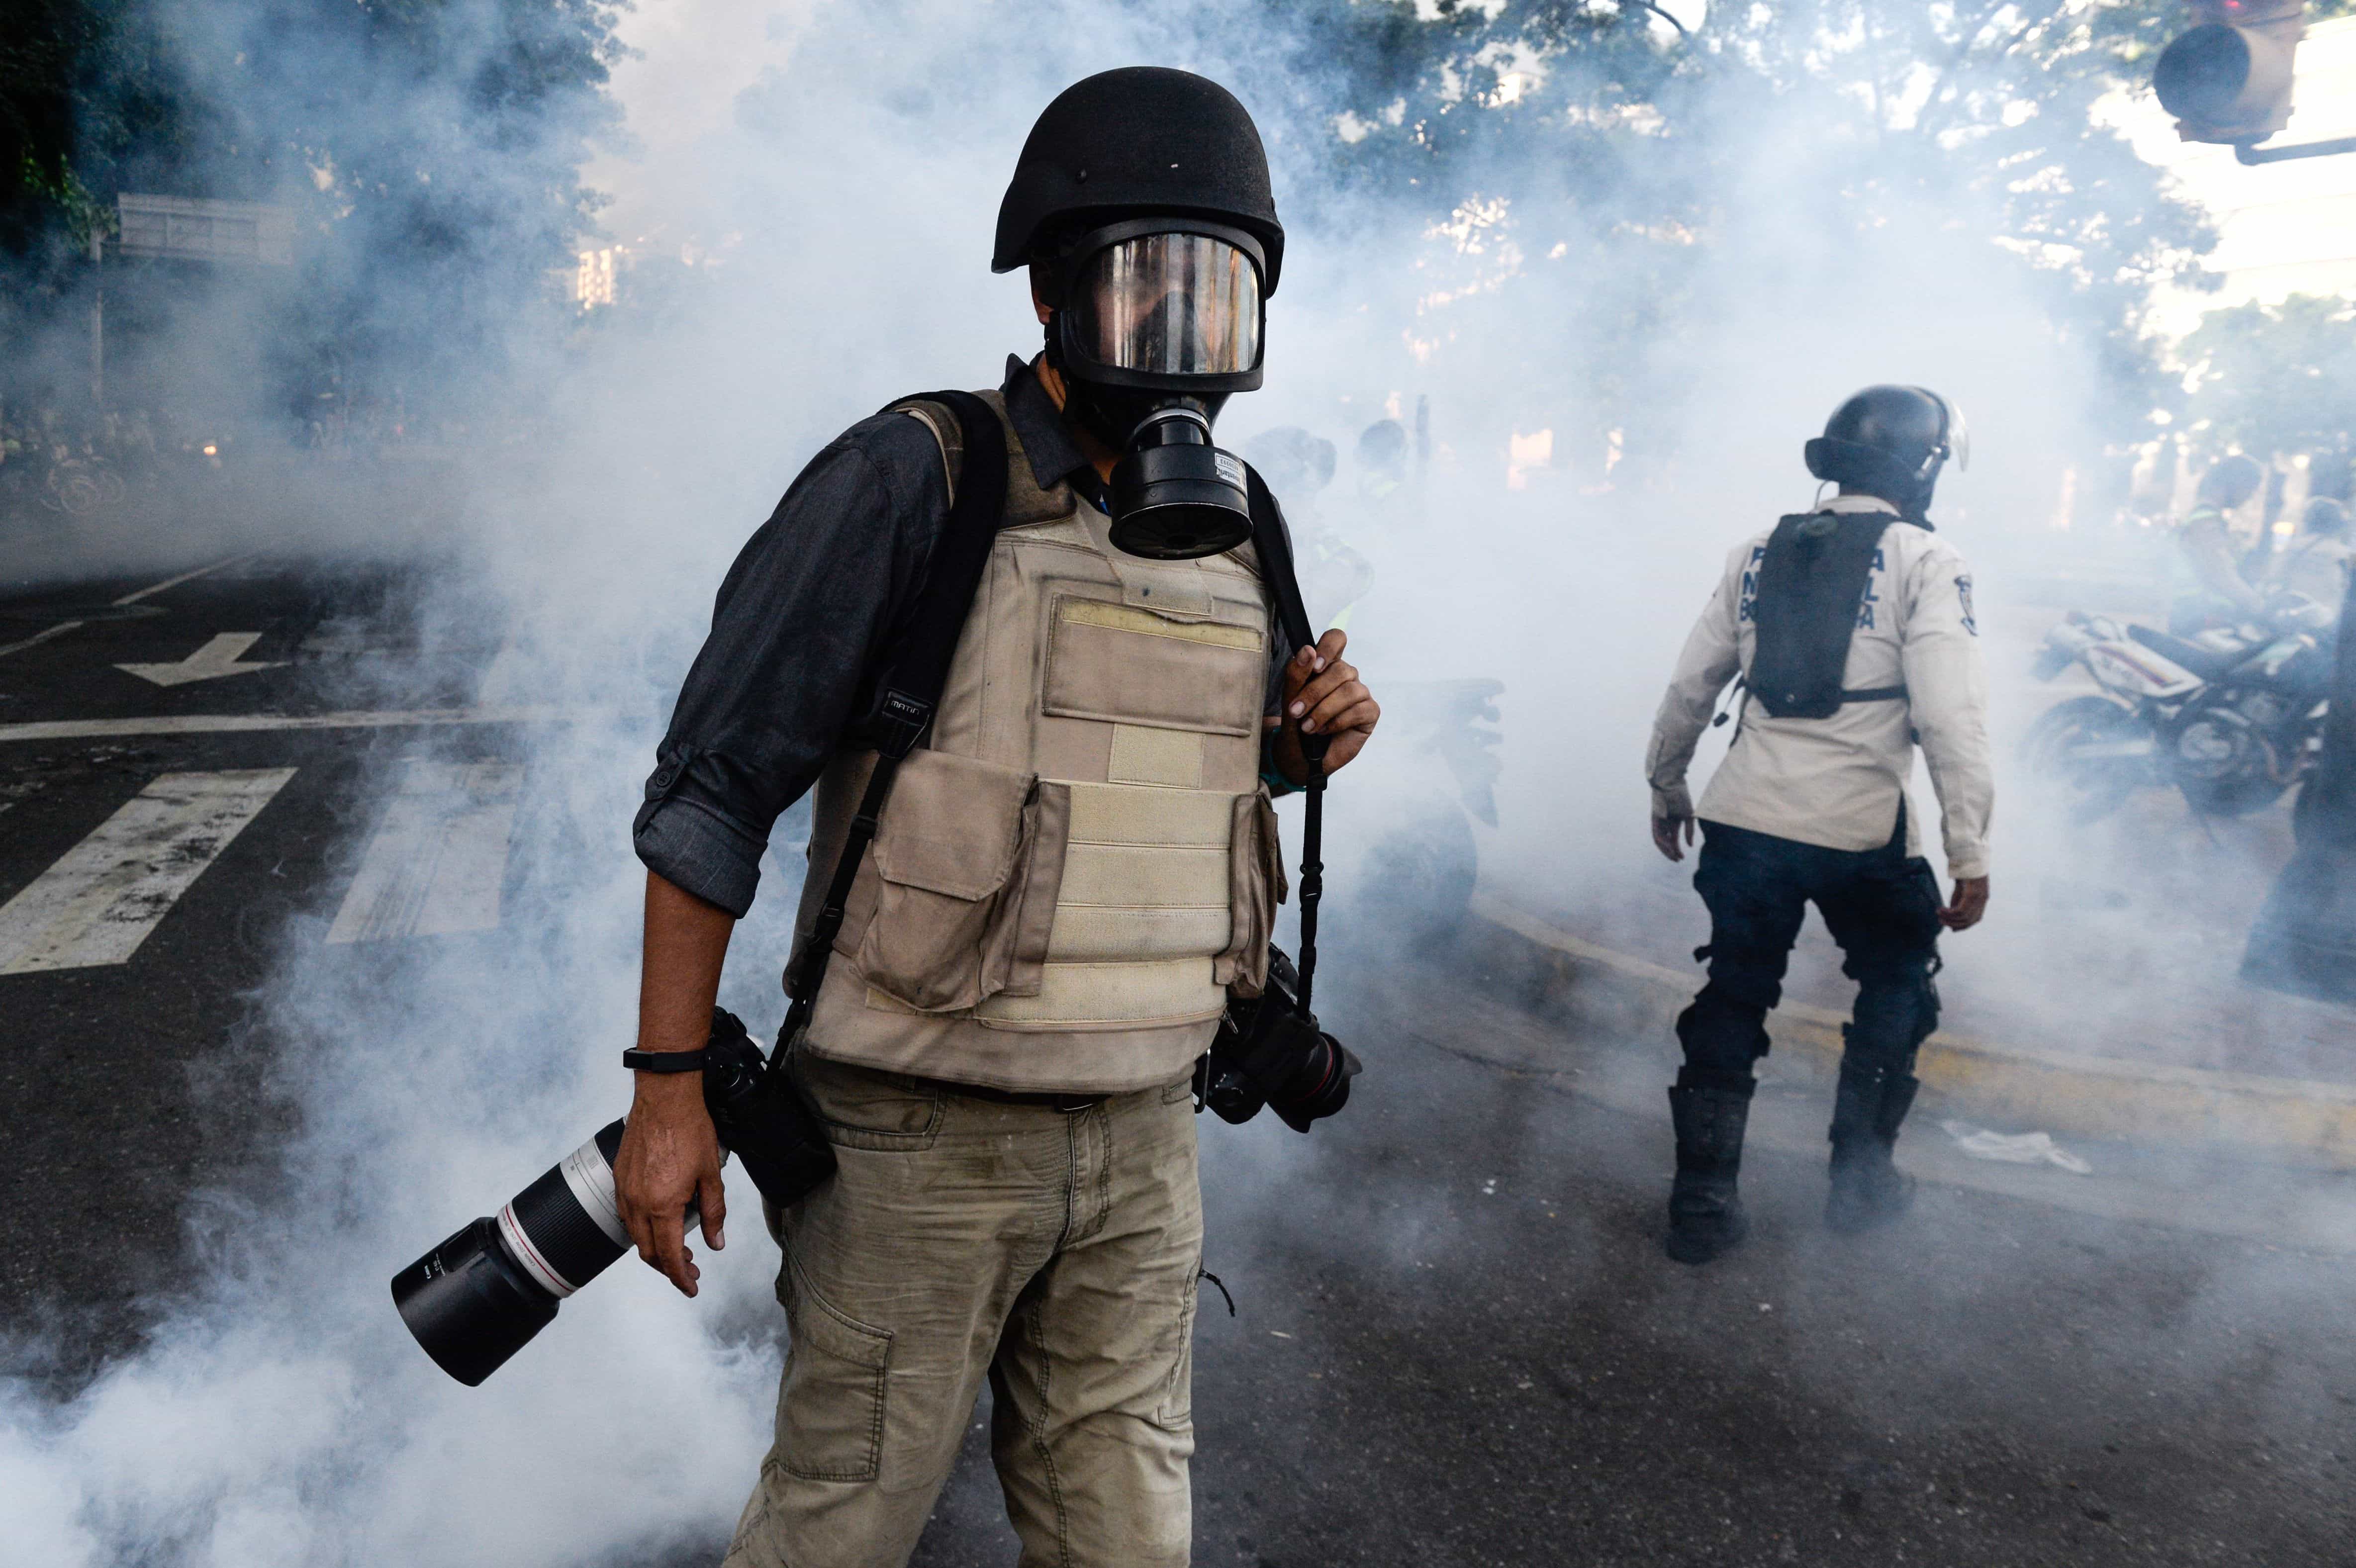 A photojournalist wades through a cloud of tear gas as opposition activists demonstrate against the government of Venezuelan President Nicolas Maduro in Caracas, 26 June 2017, FEDERICO PARRA/AFP/Getty Images